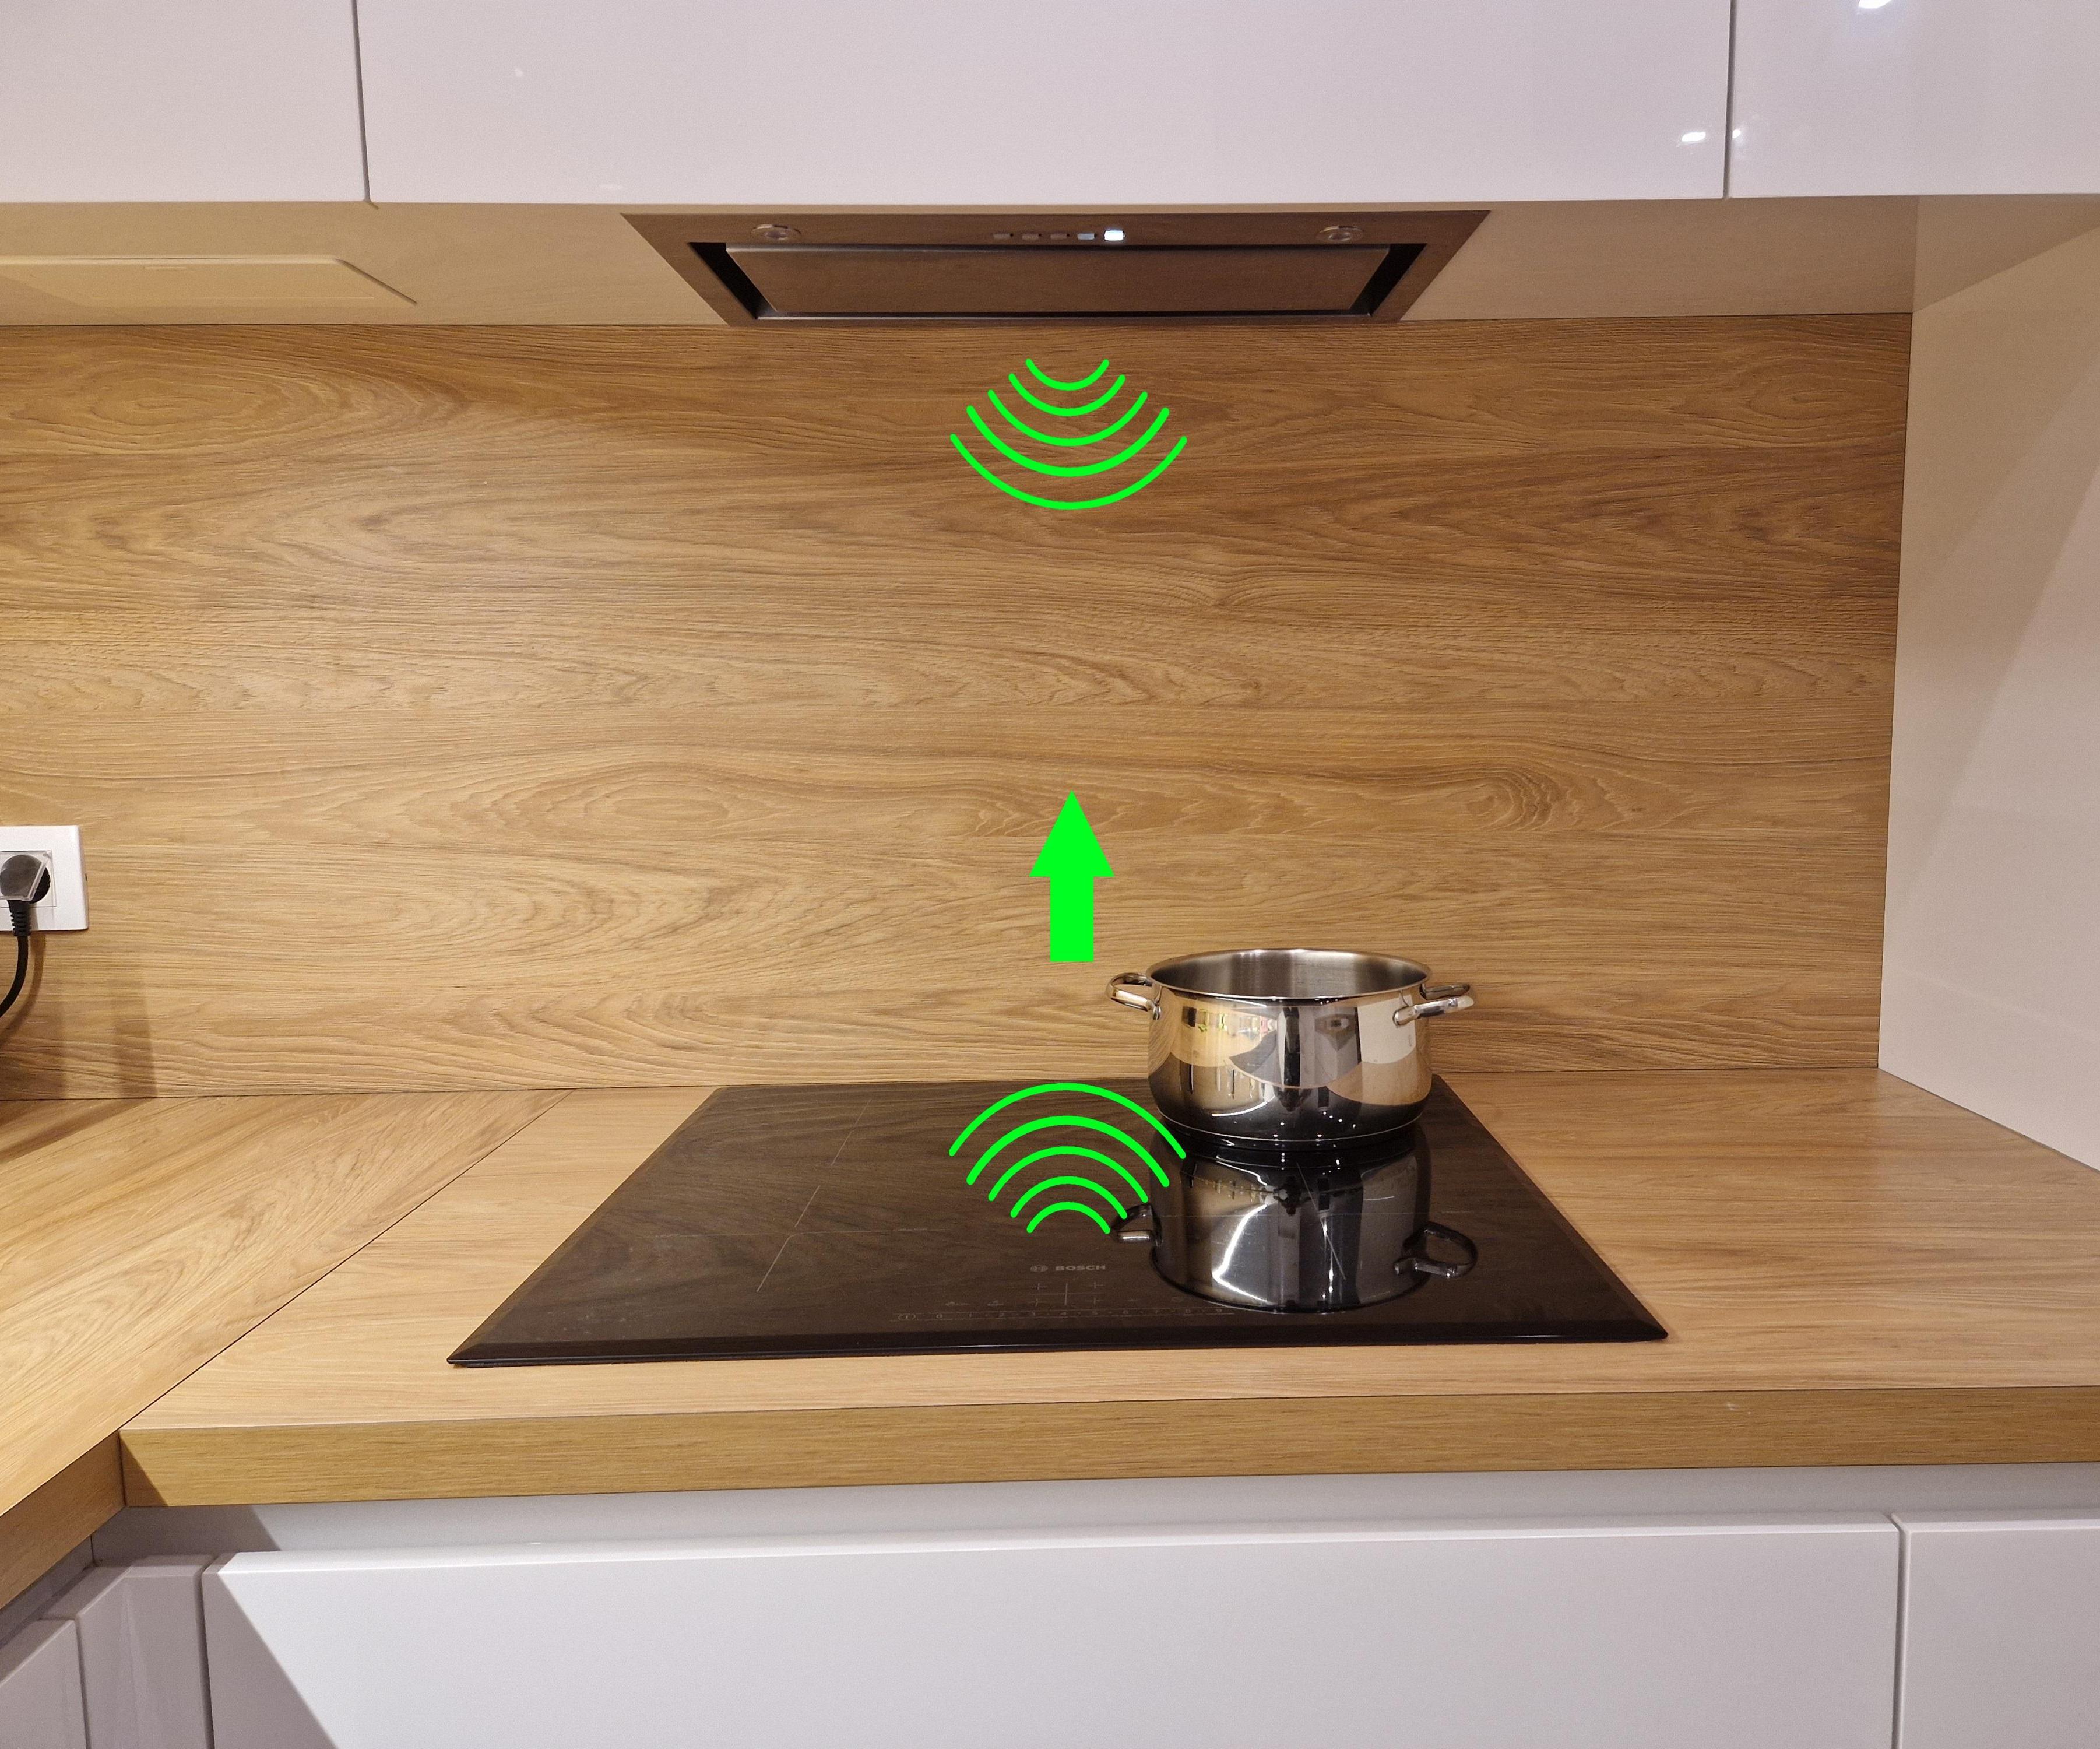 Automatic Kitchen Hood Activation With Induction Cooktop (with Arduino)